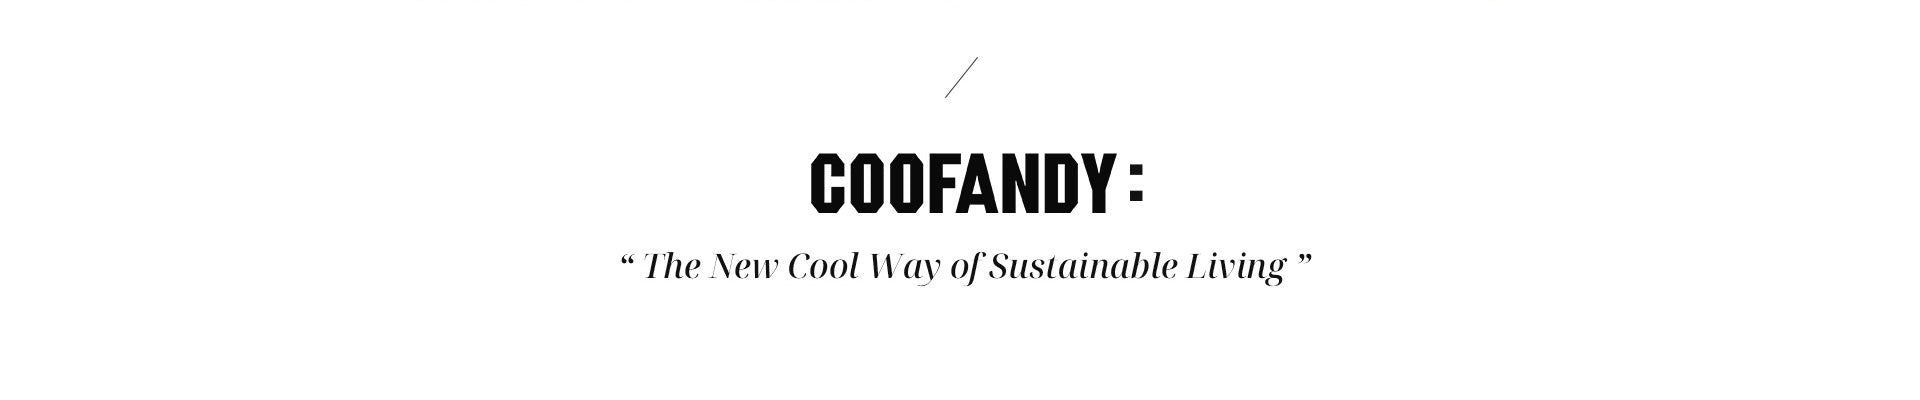 The New Cool Way of Sustainable Living 